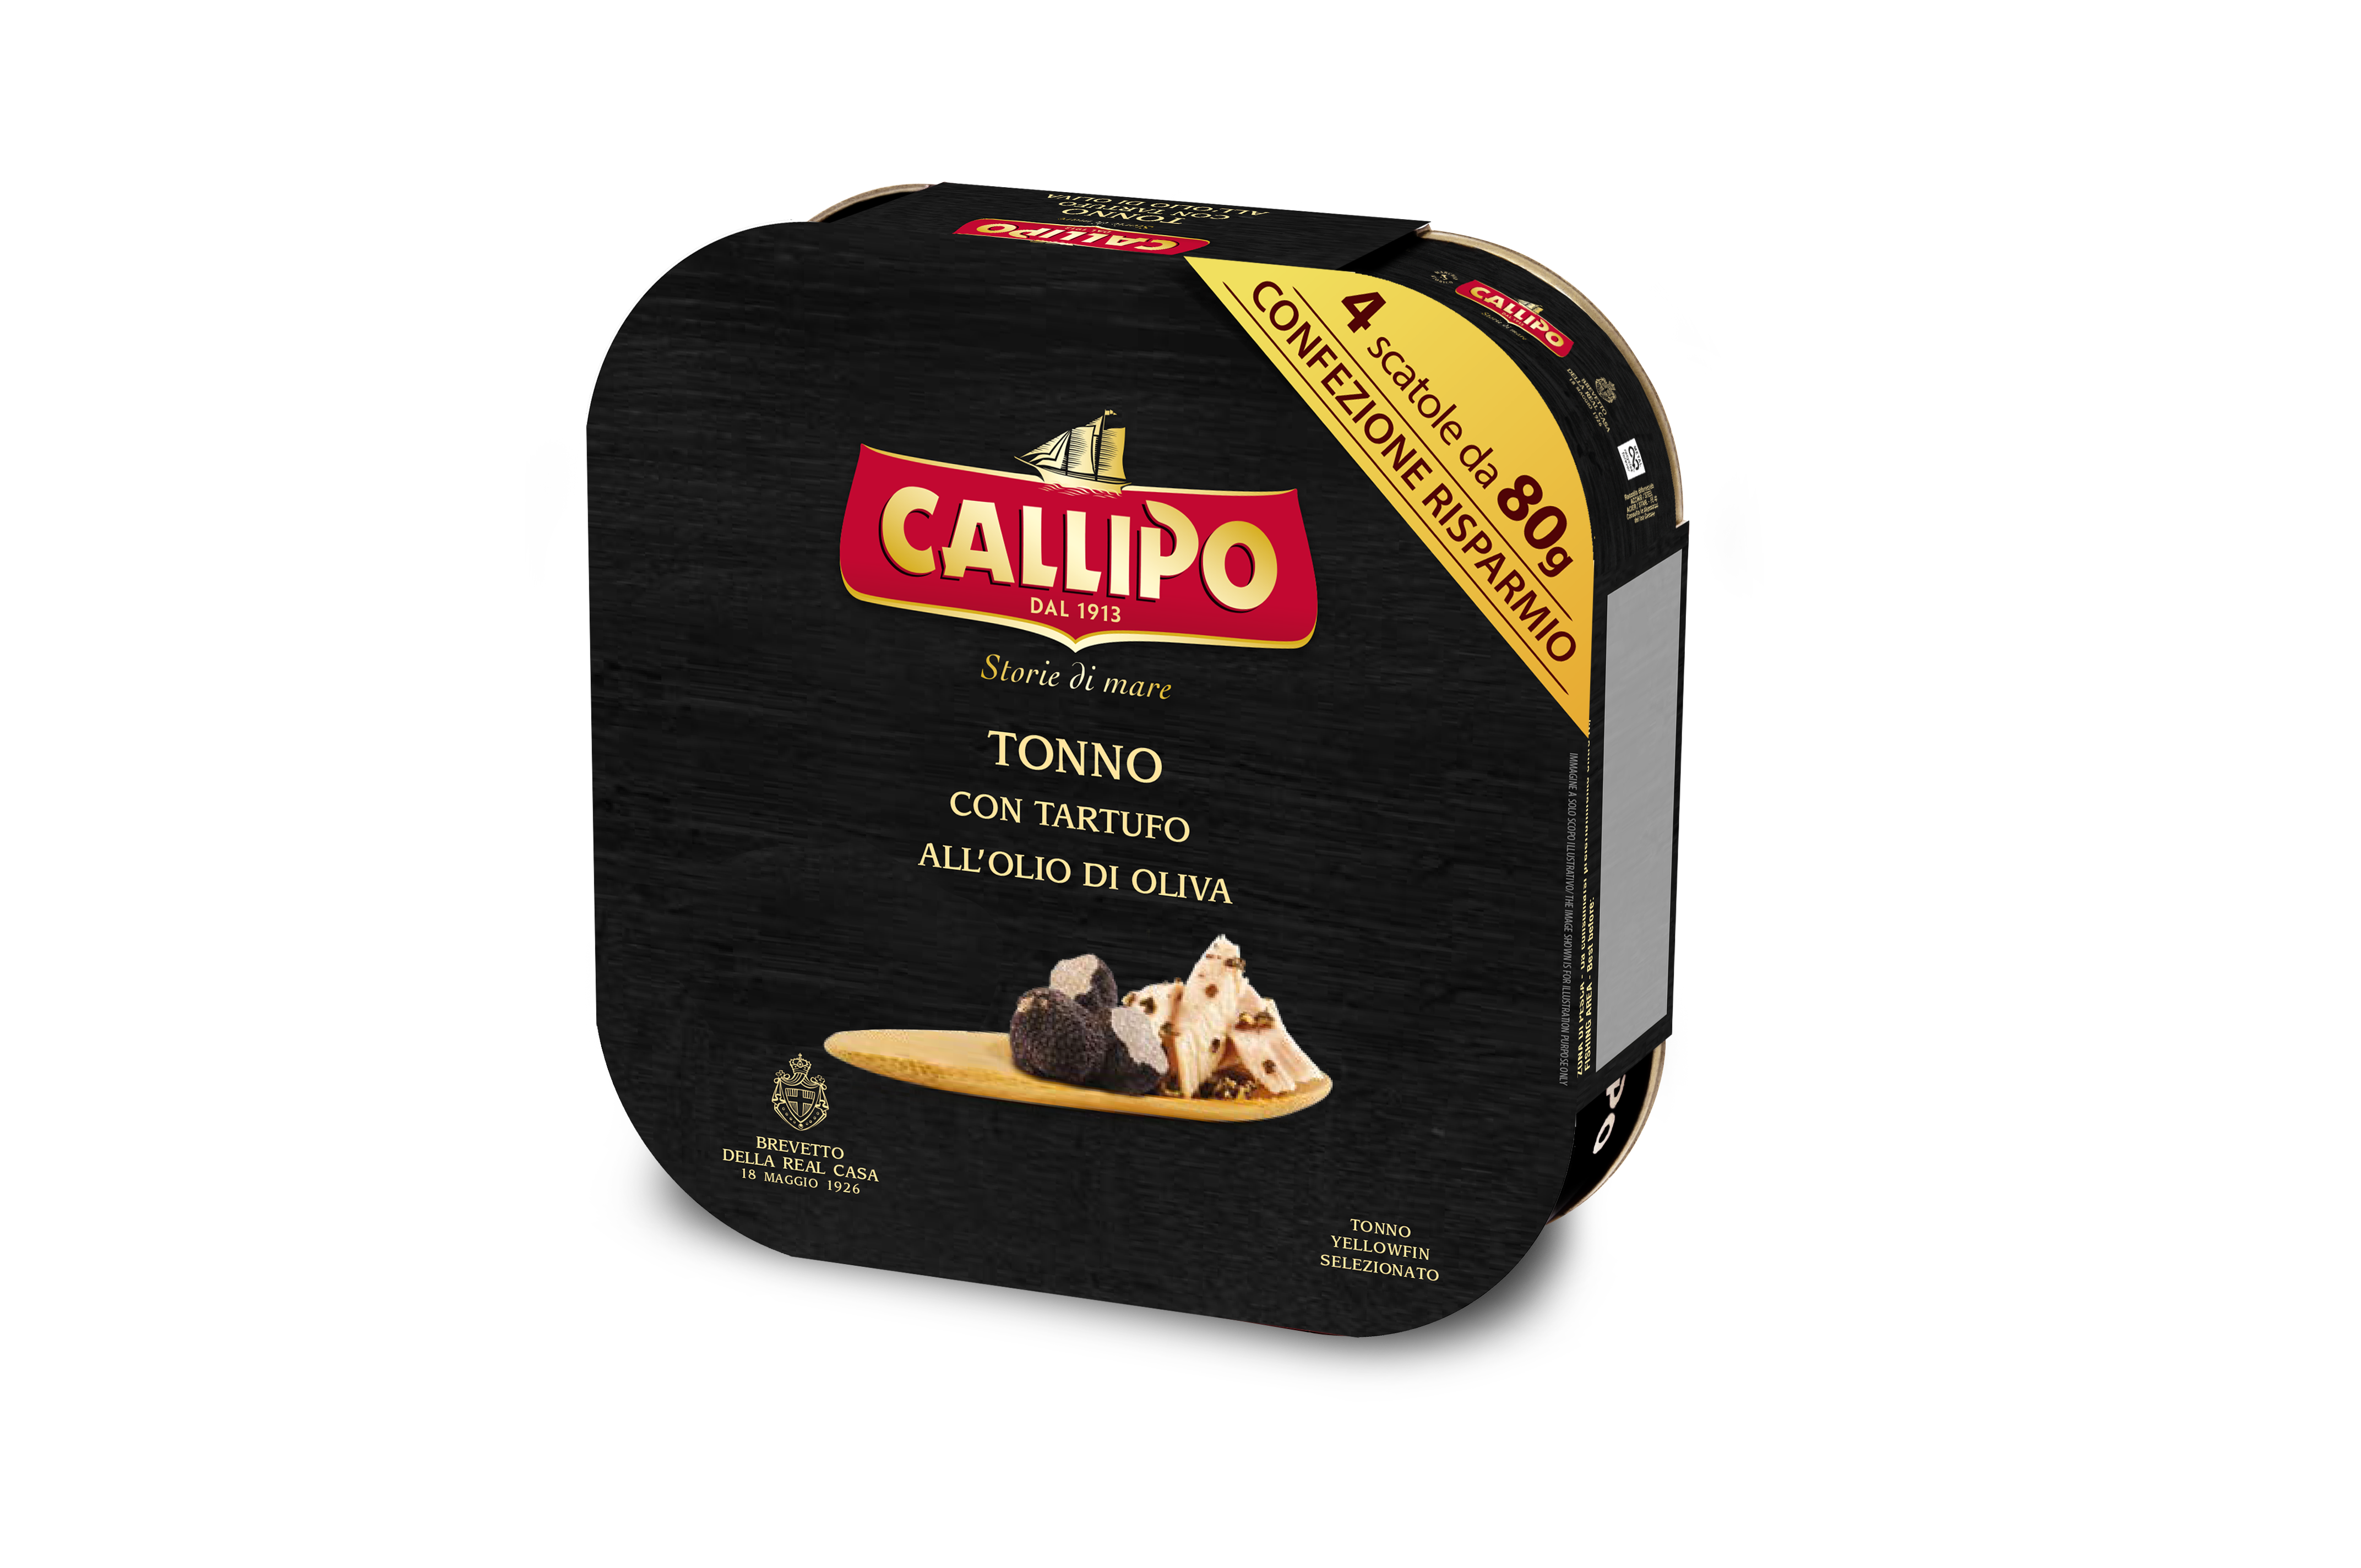 Callipo solid tuna cans in olive oil with Truffle gr. 80x4